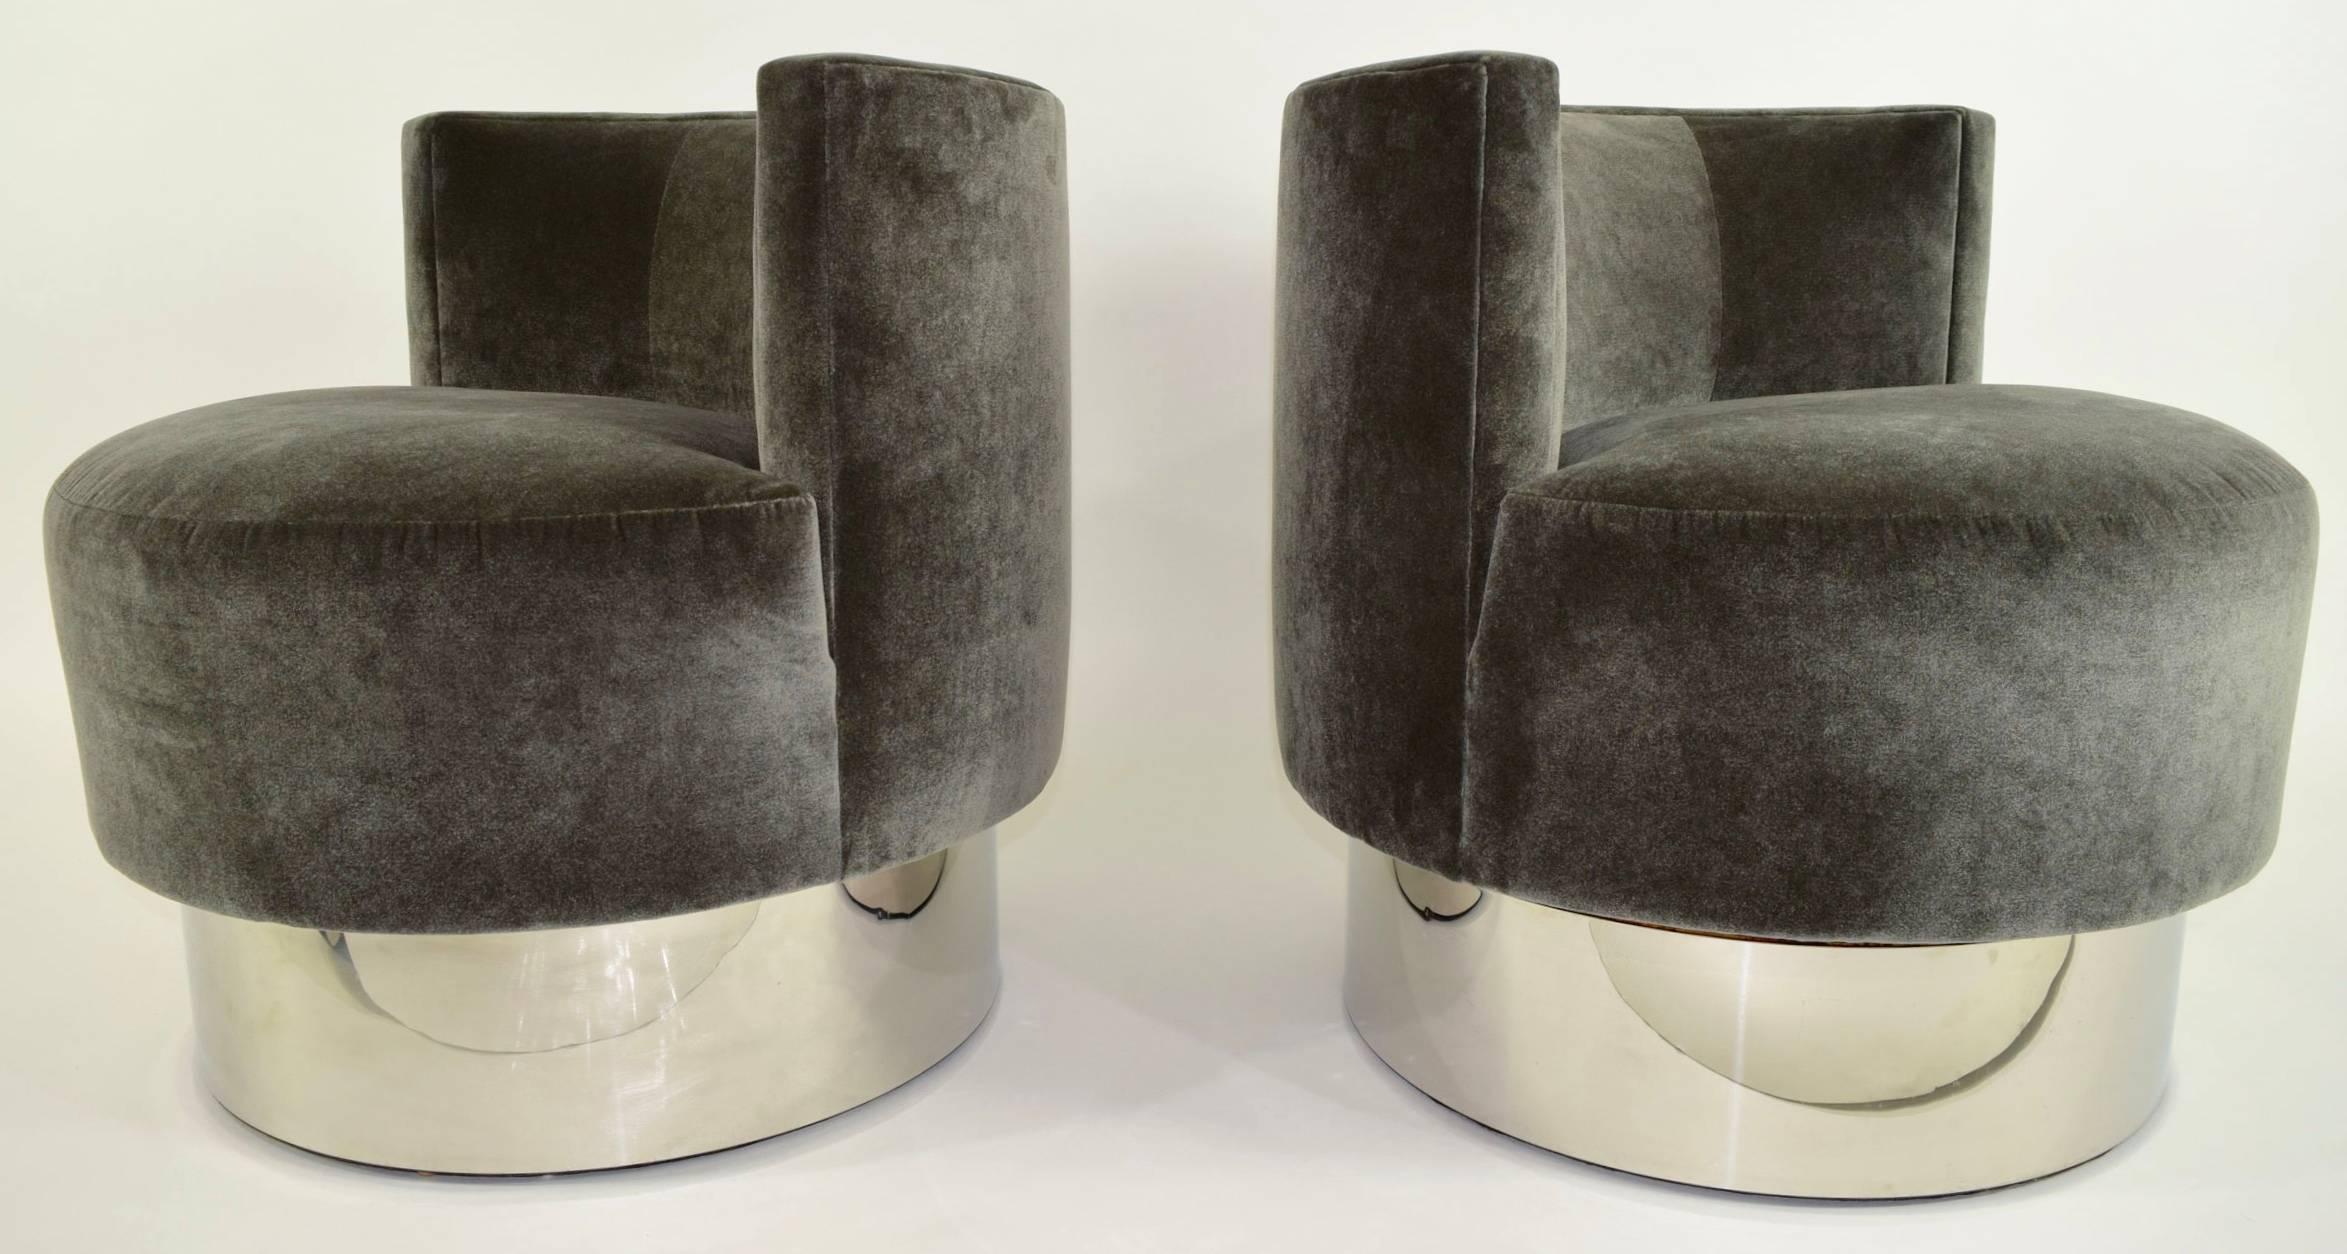 A wonderful pair of Milo Baughman lounge chairs newly upholstered in Holly Hunt Great Plains fabric. The fabric is soft and glamorous. Bases are chrome. This can be changed to brass finish if desired.